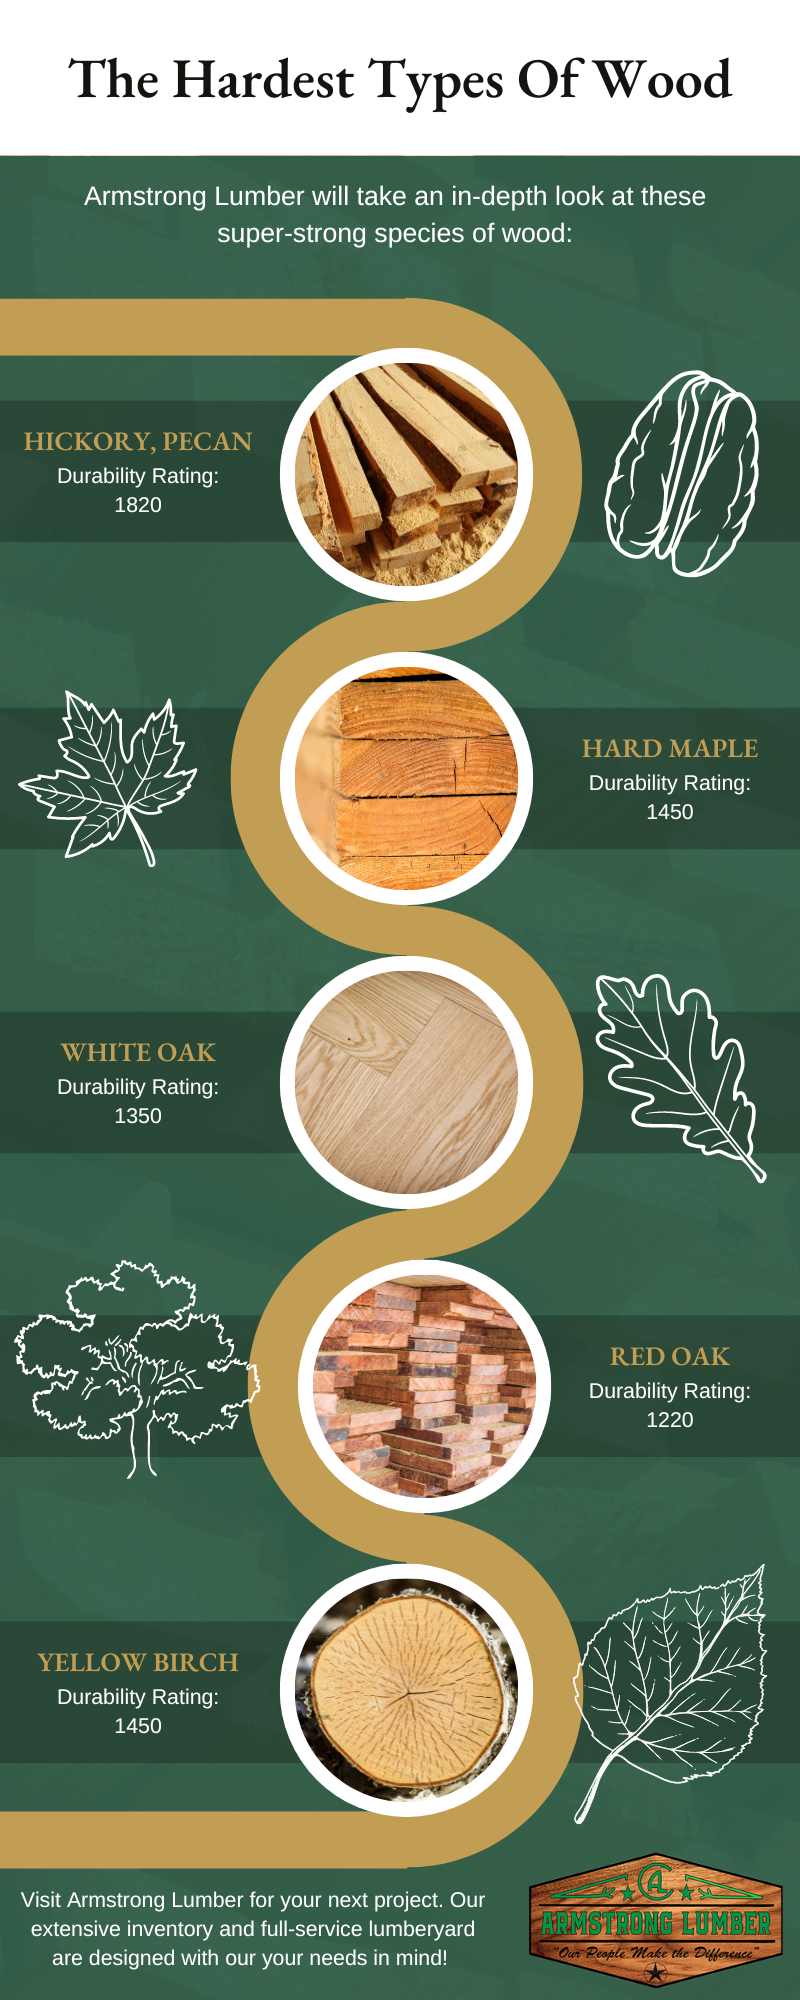 M33903 - Armstrong Lumber - Infographic - The Hardest Types Of Wood.png